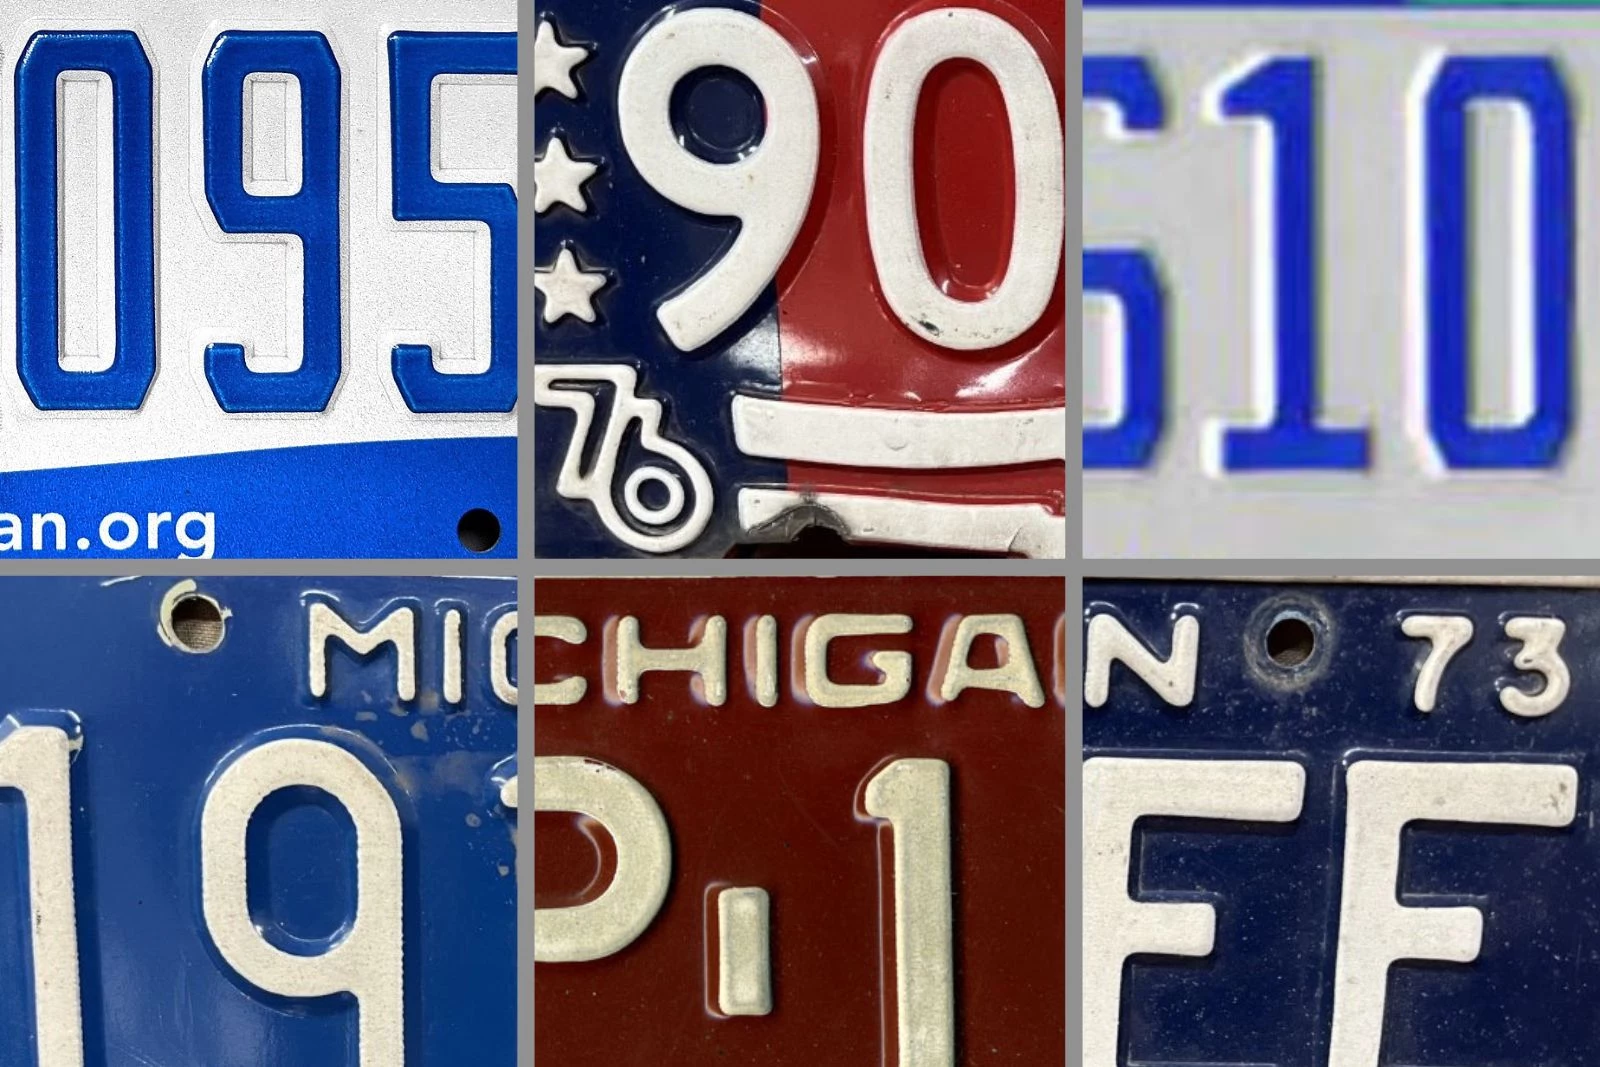 Seeing More of These MI License Plates? Here's How to Get One